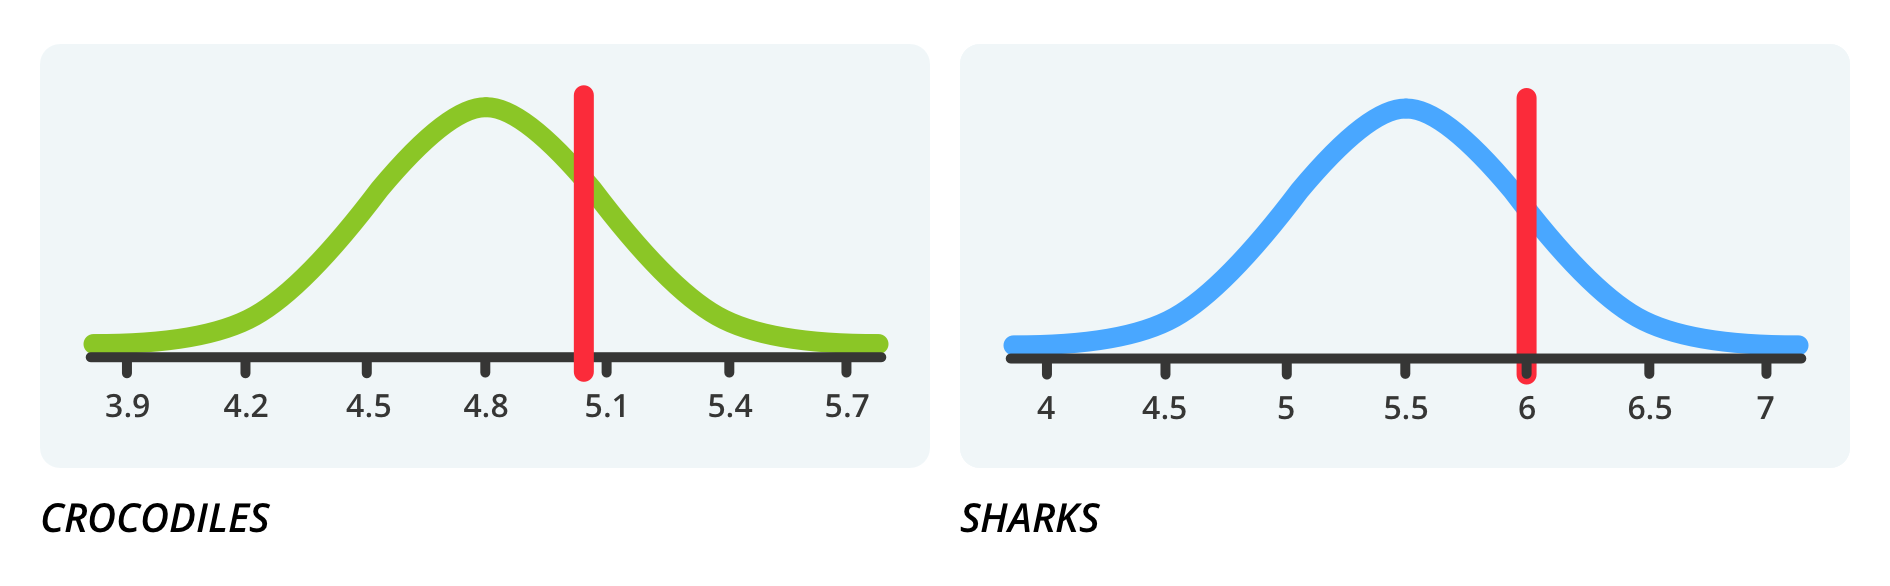 comparison of normal distributions of crocs (right) and sharks (left)